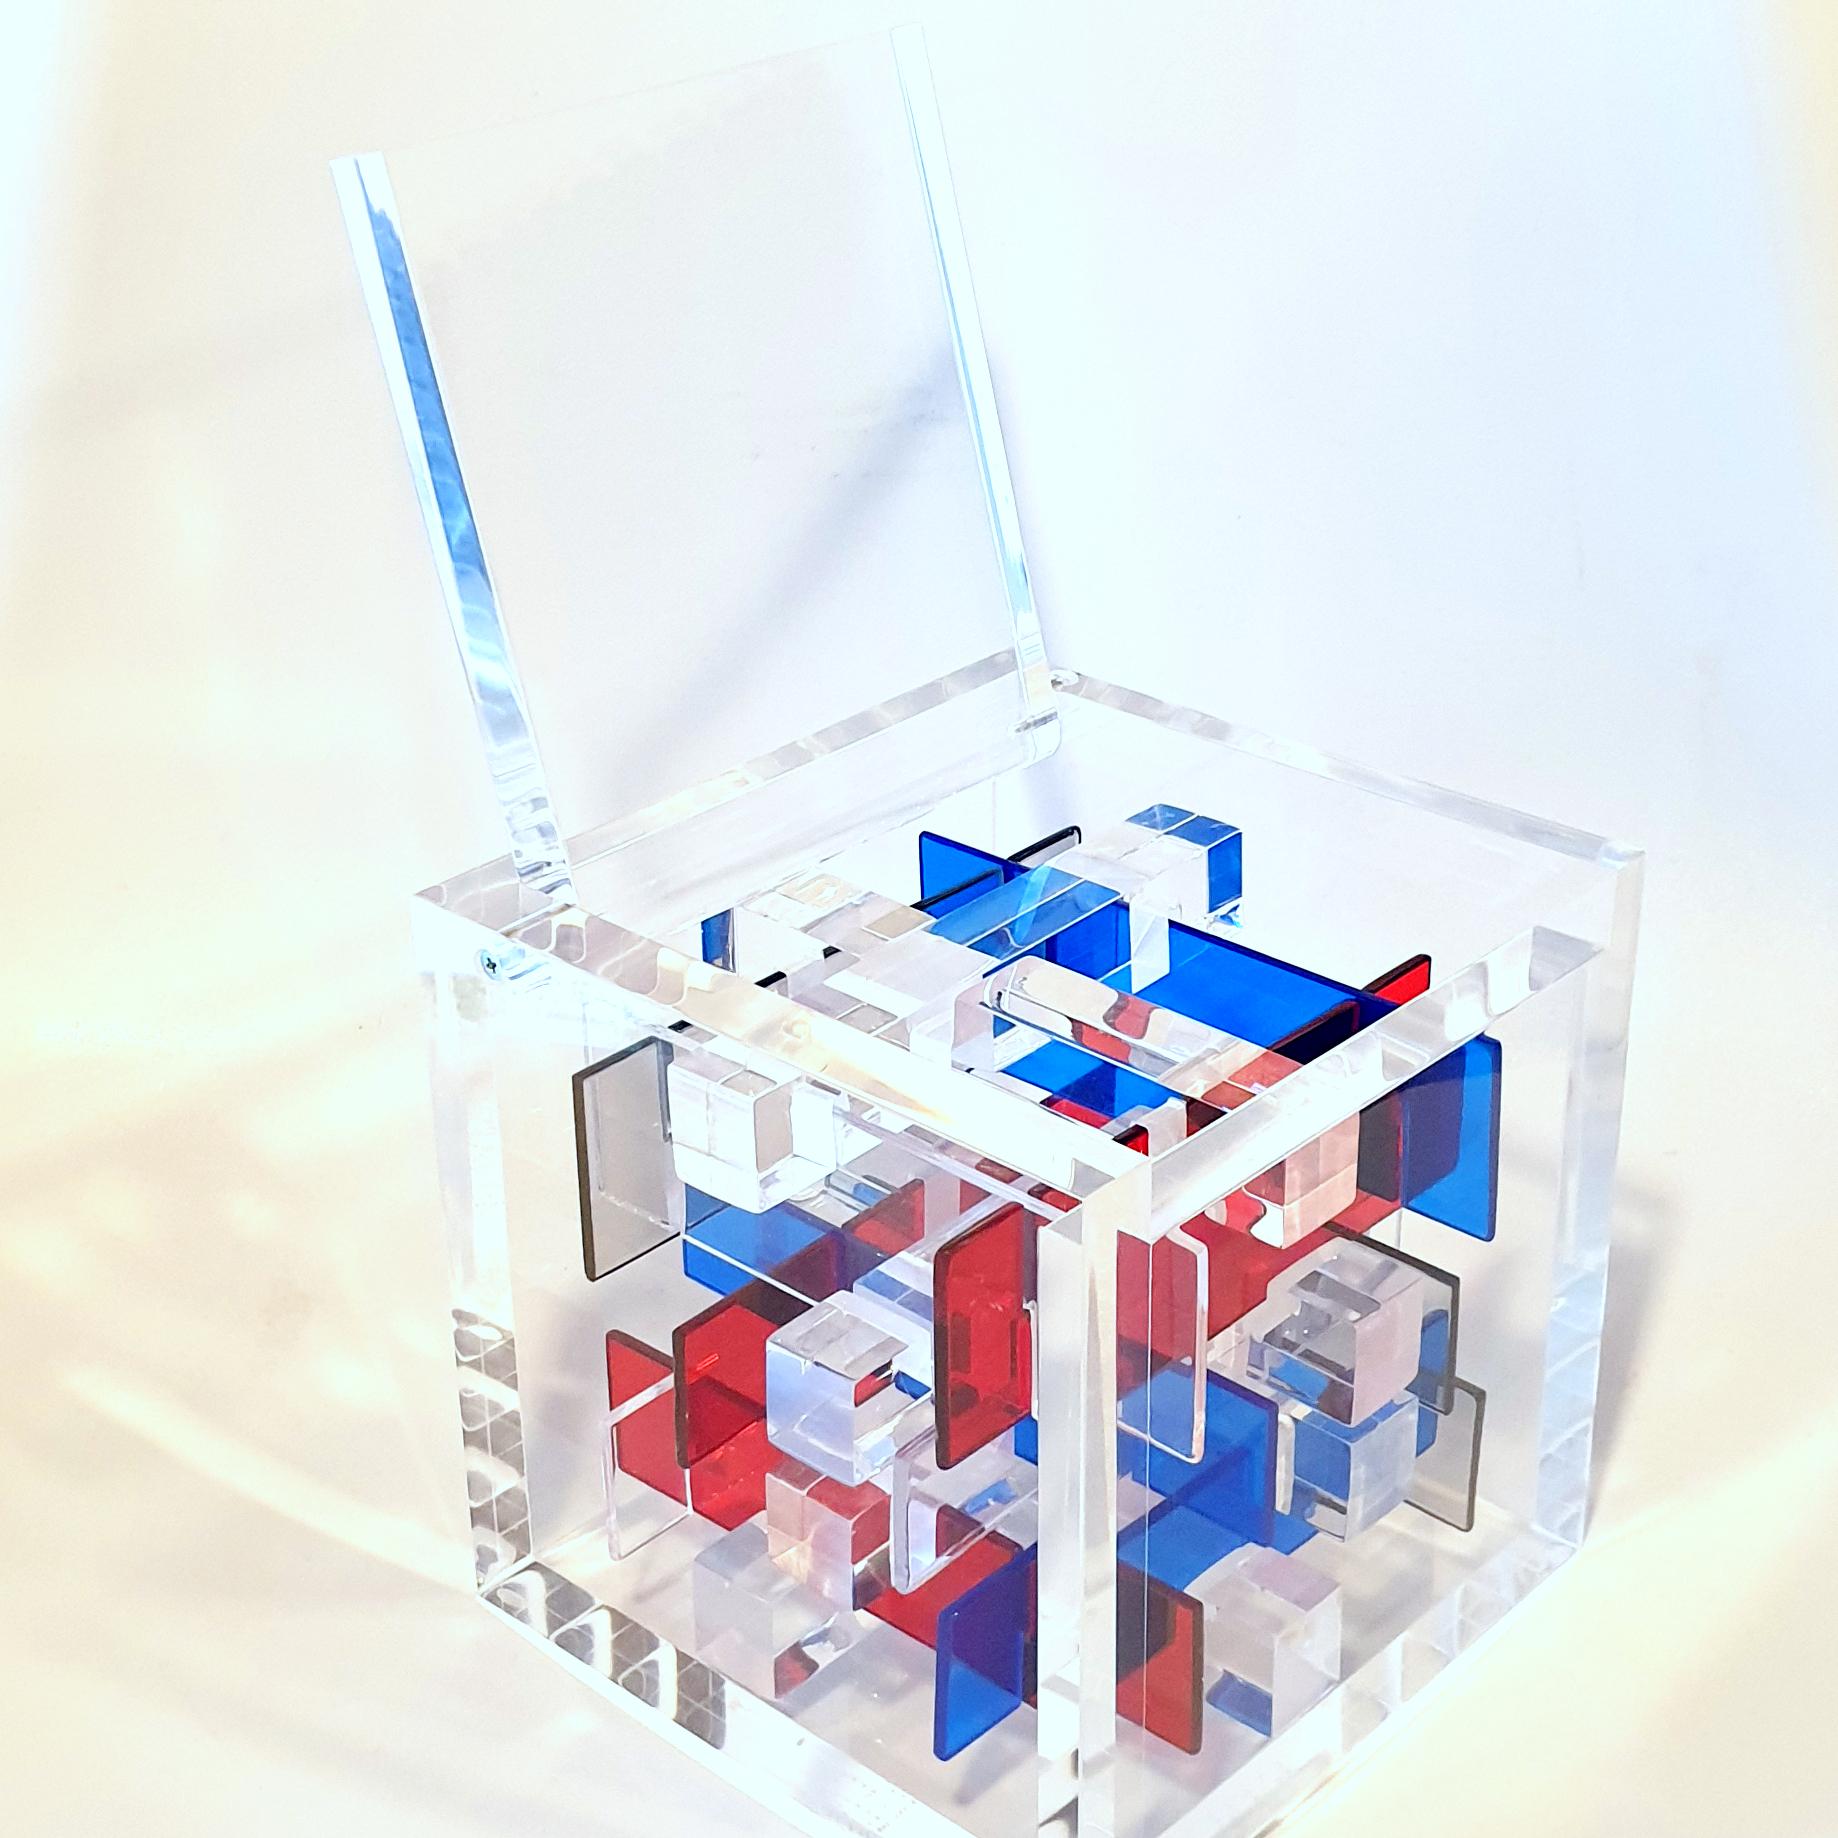 Composition BRGT - contemporary modern abstract geometric cube sculpture - Sculpture by Haringa + Olijve